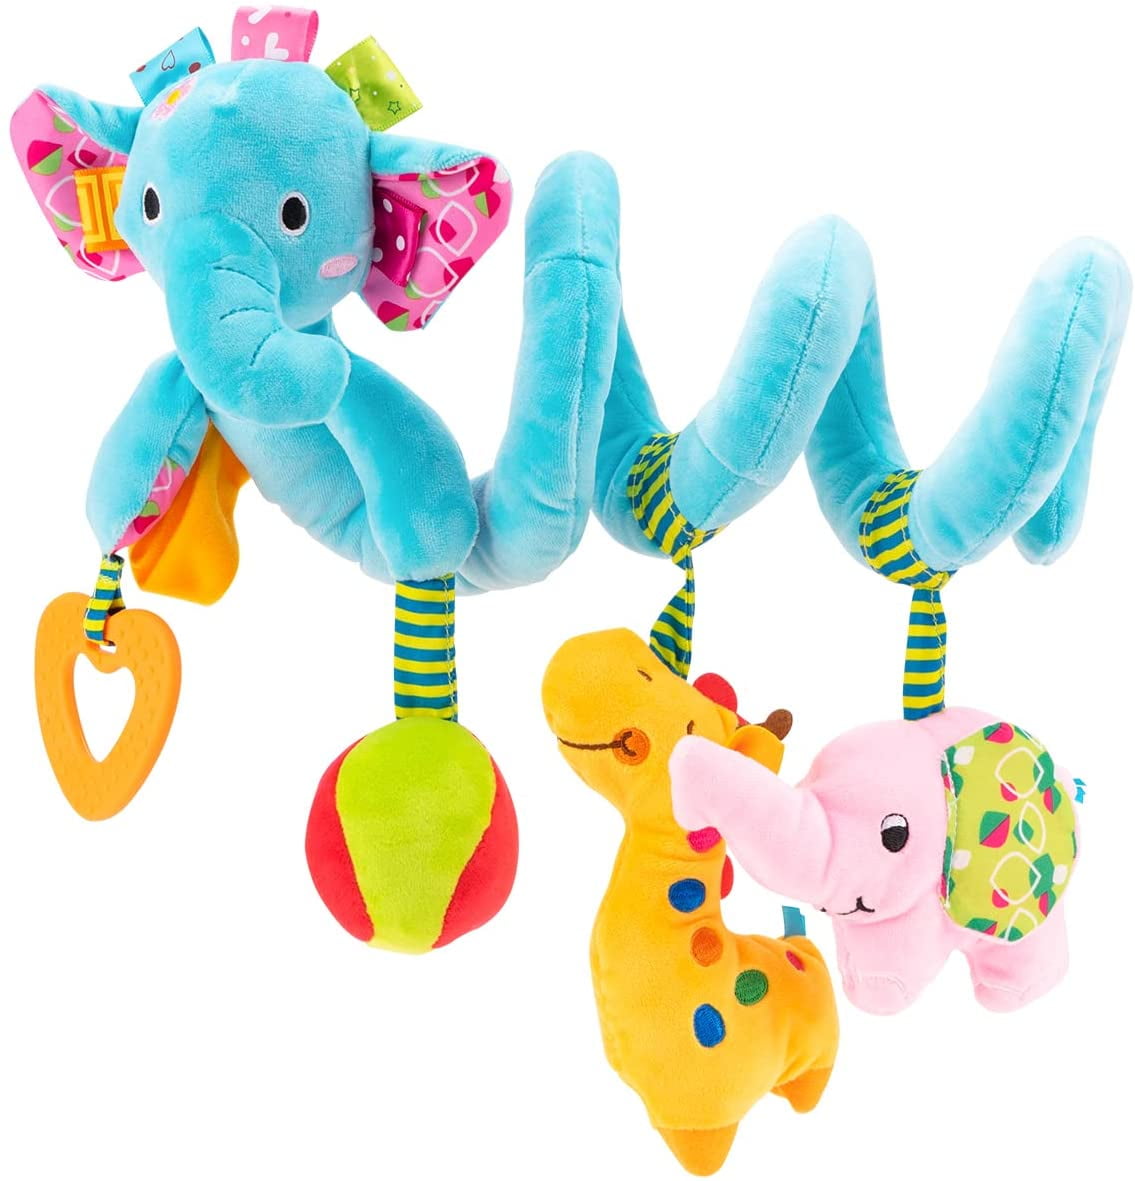 Infant Crib Car Seat Toys Colorful Animal Elephant 0 3 6 9 12 Months Baby Rattles Baby Gift for Infant Boys and Girls Newborn Stroller Toys Baby Hanging Rattle Toys 